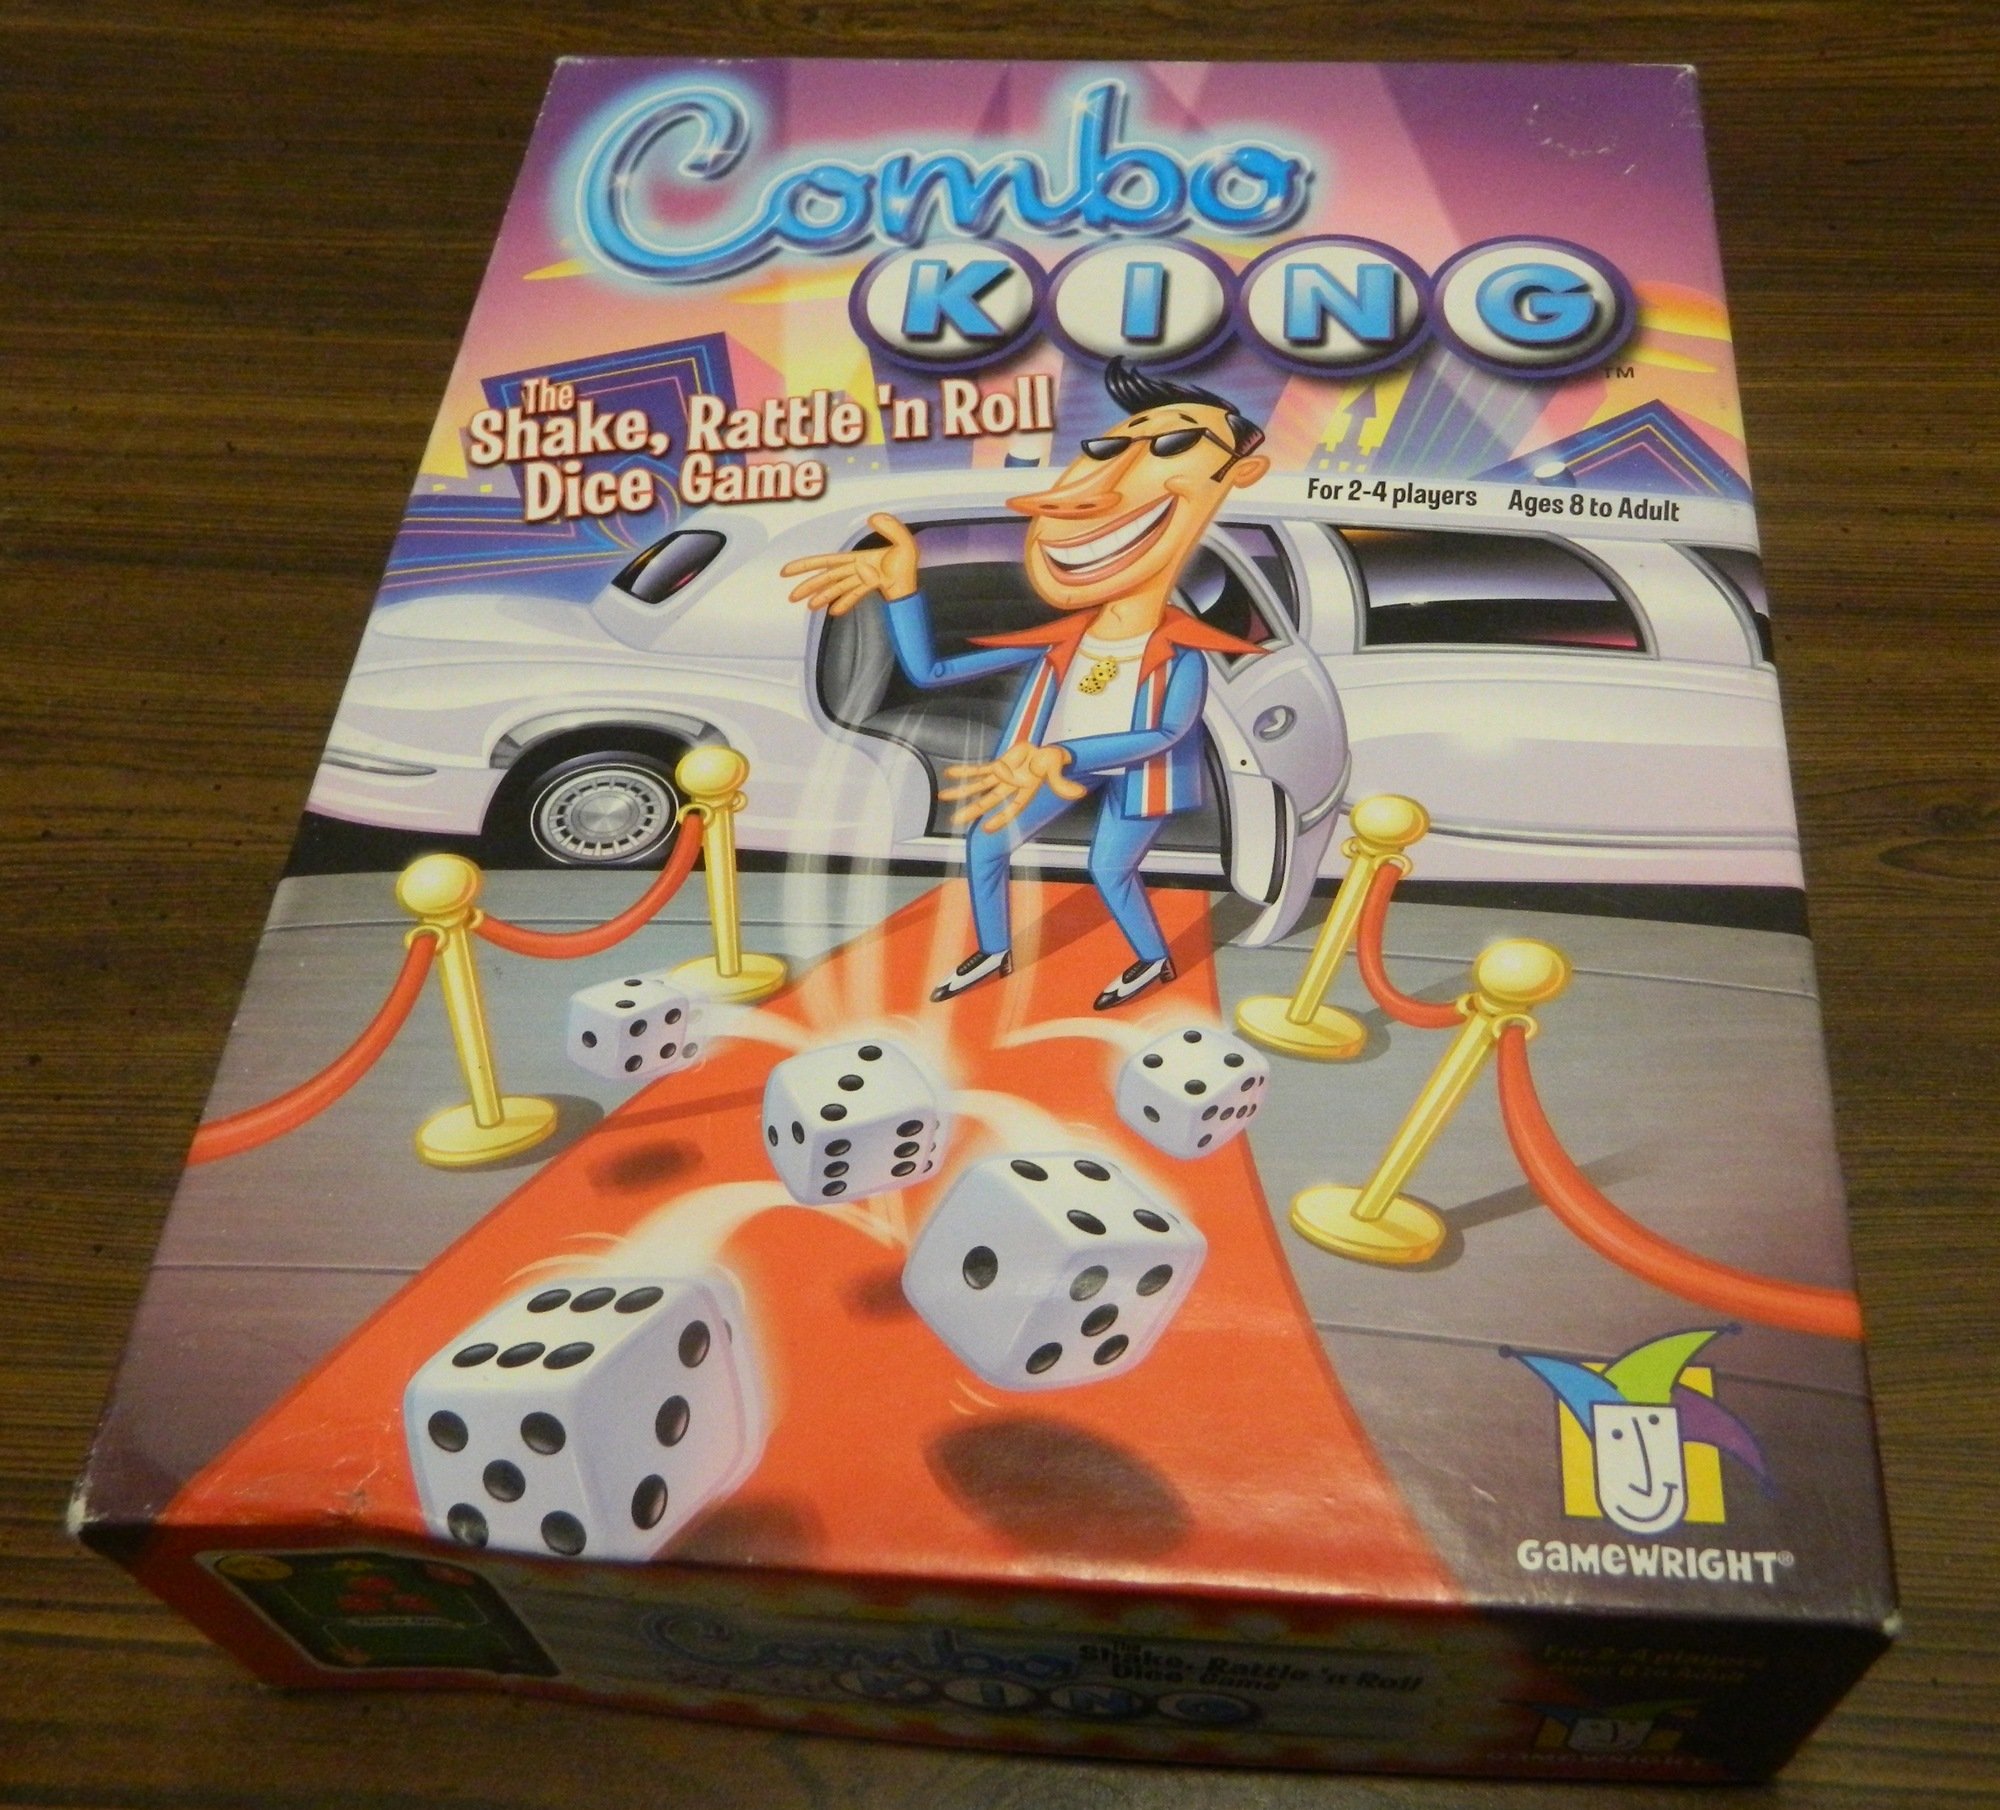 Combo King Dice Game Review and Rules